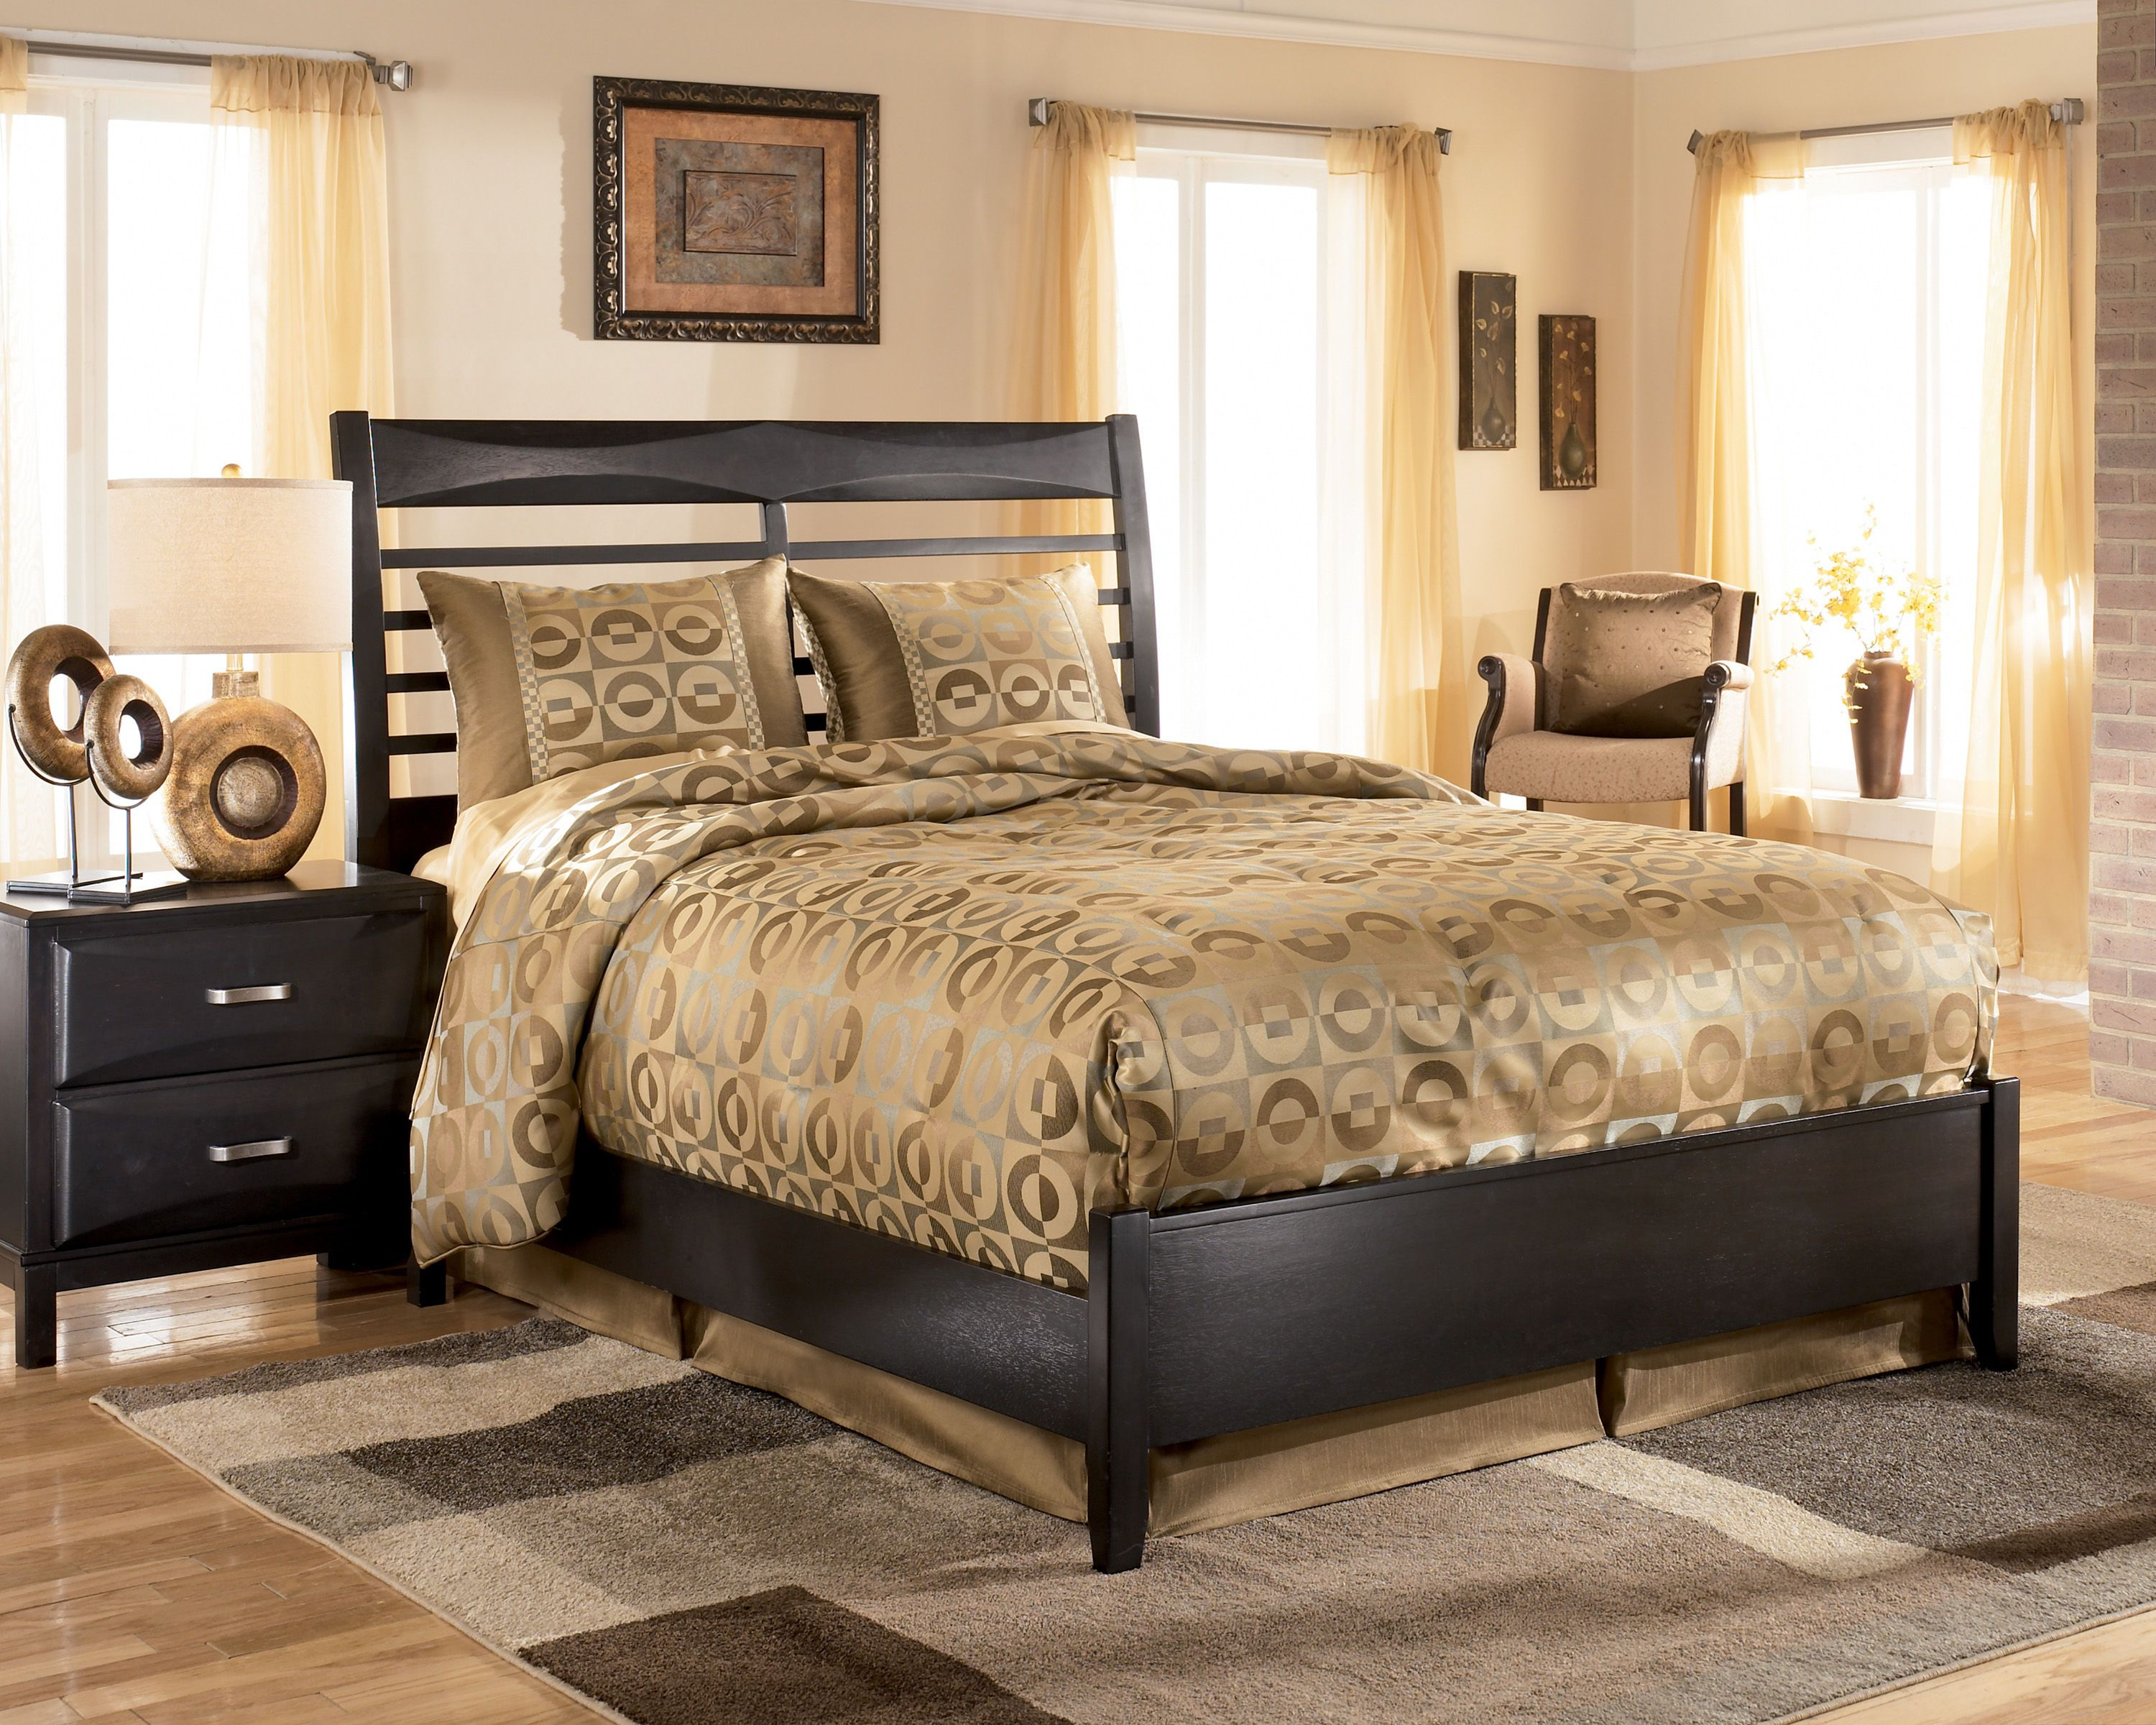 Kira Black King Panel Bed My Quarters Furniture Small Room intended for size 3000 X 2400